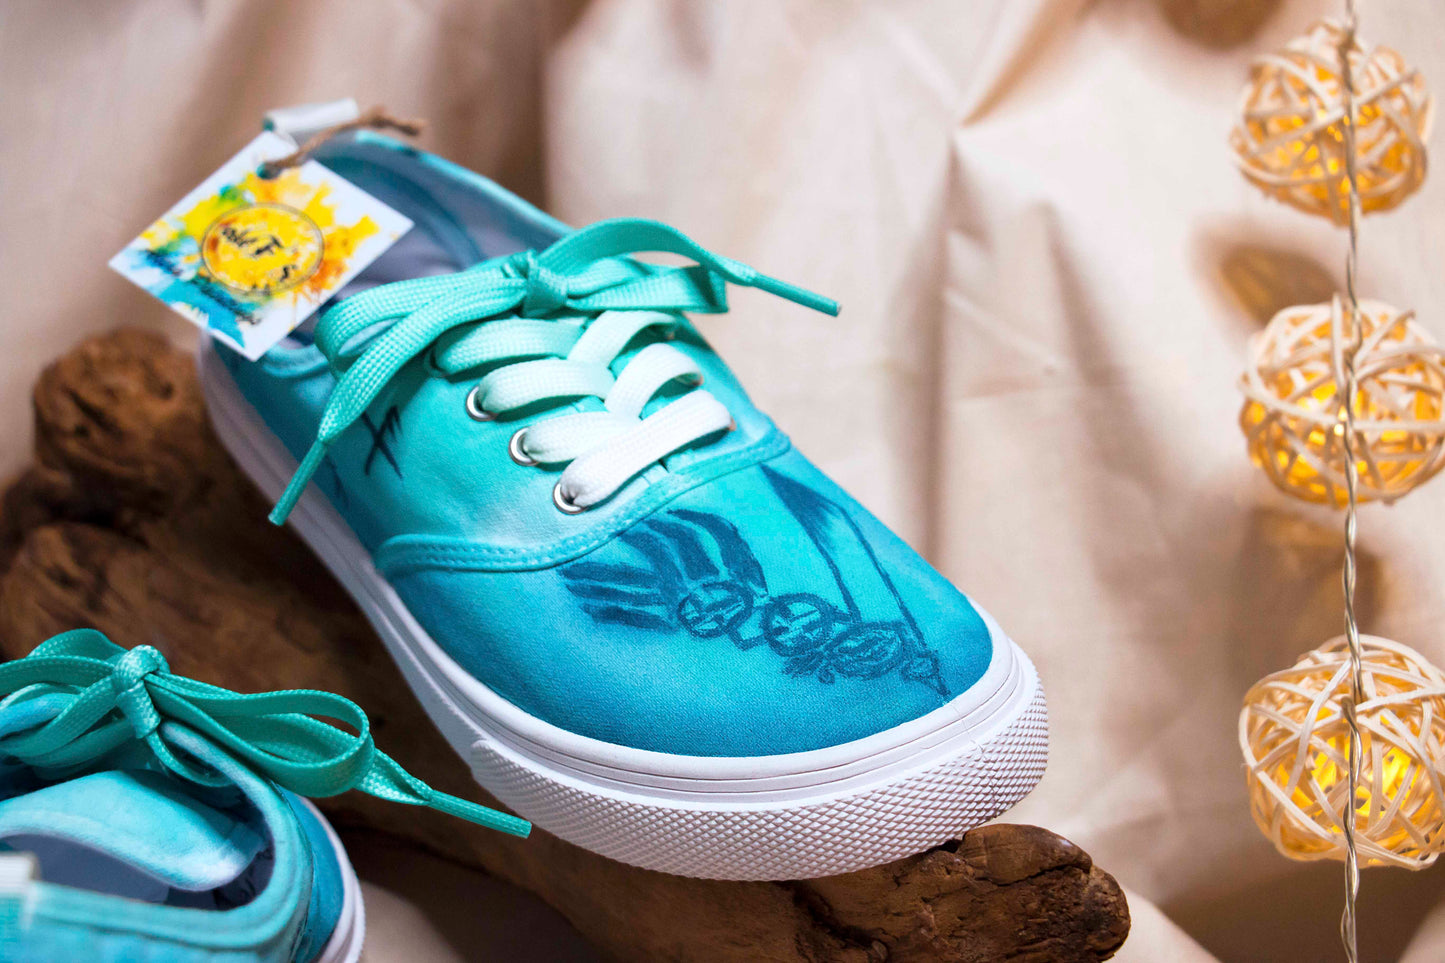 Tenisi Pictati, Painted Sneakers, Pictura Manuala Tenisi, handmade shoes, Everyday shoes, Woman Fashion, customized shoes, Trees, Aurora Trees, Aurora, Aurora Sneakers, Vikings, Vikings movie, Vkings totem